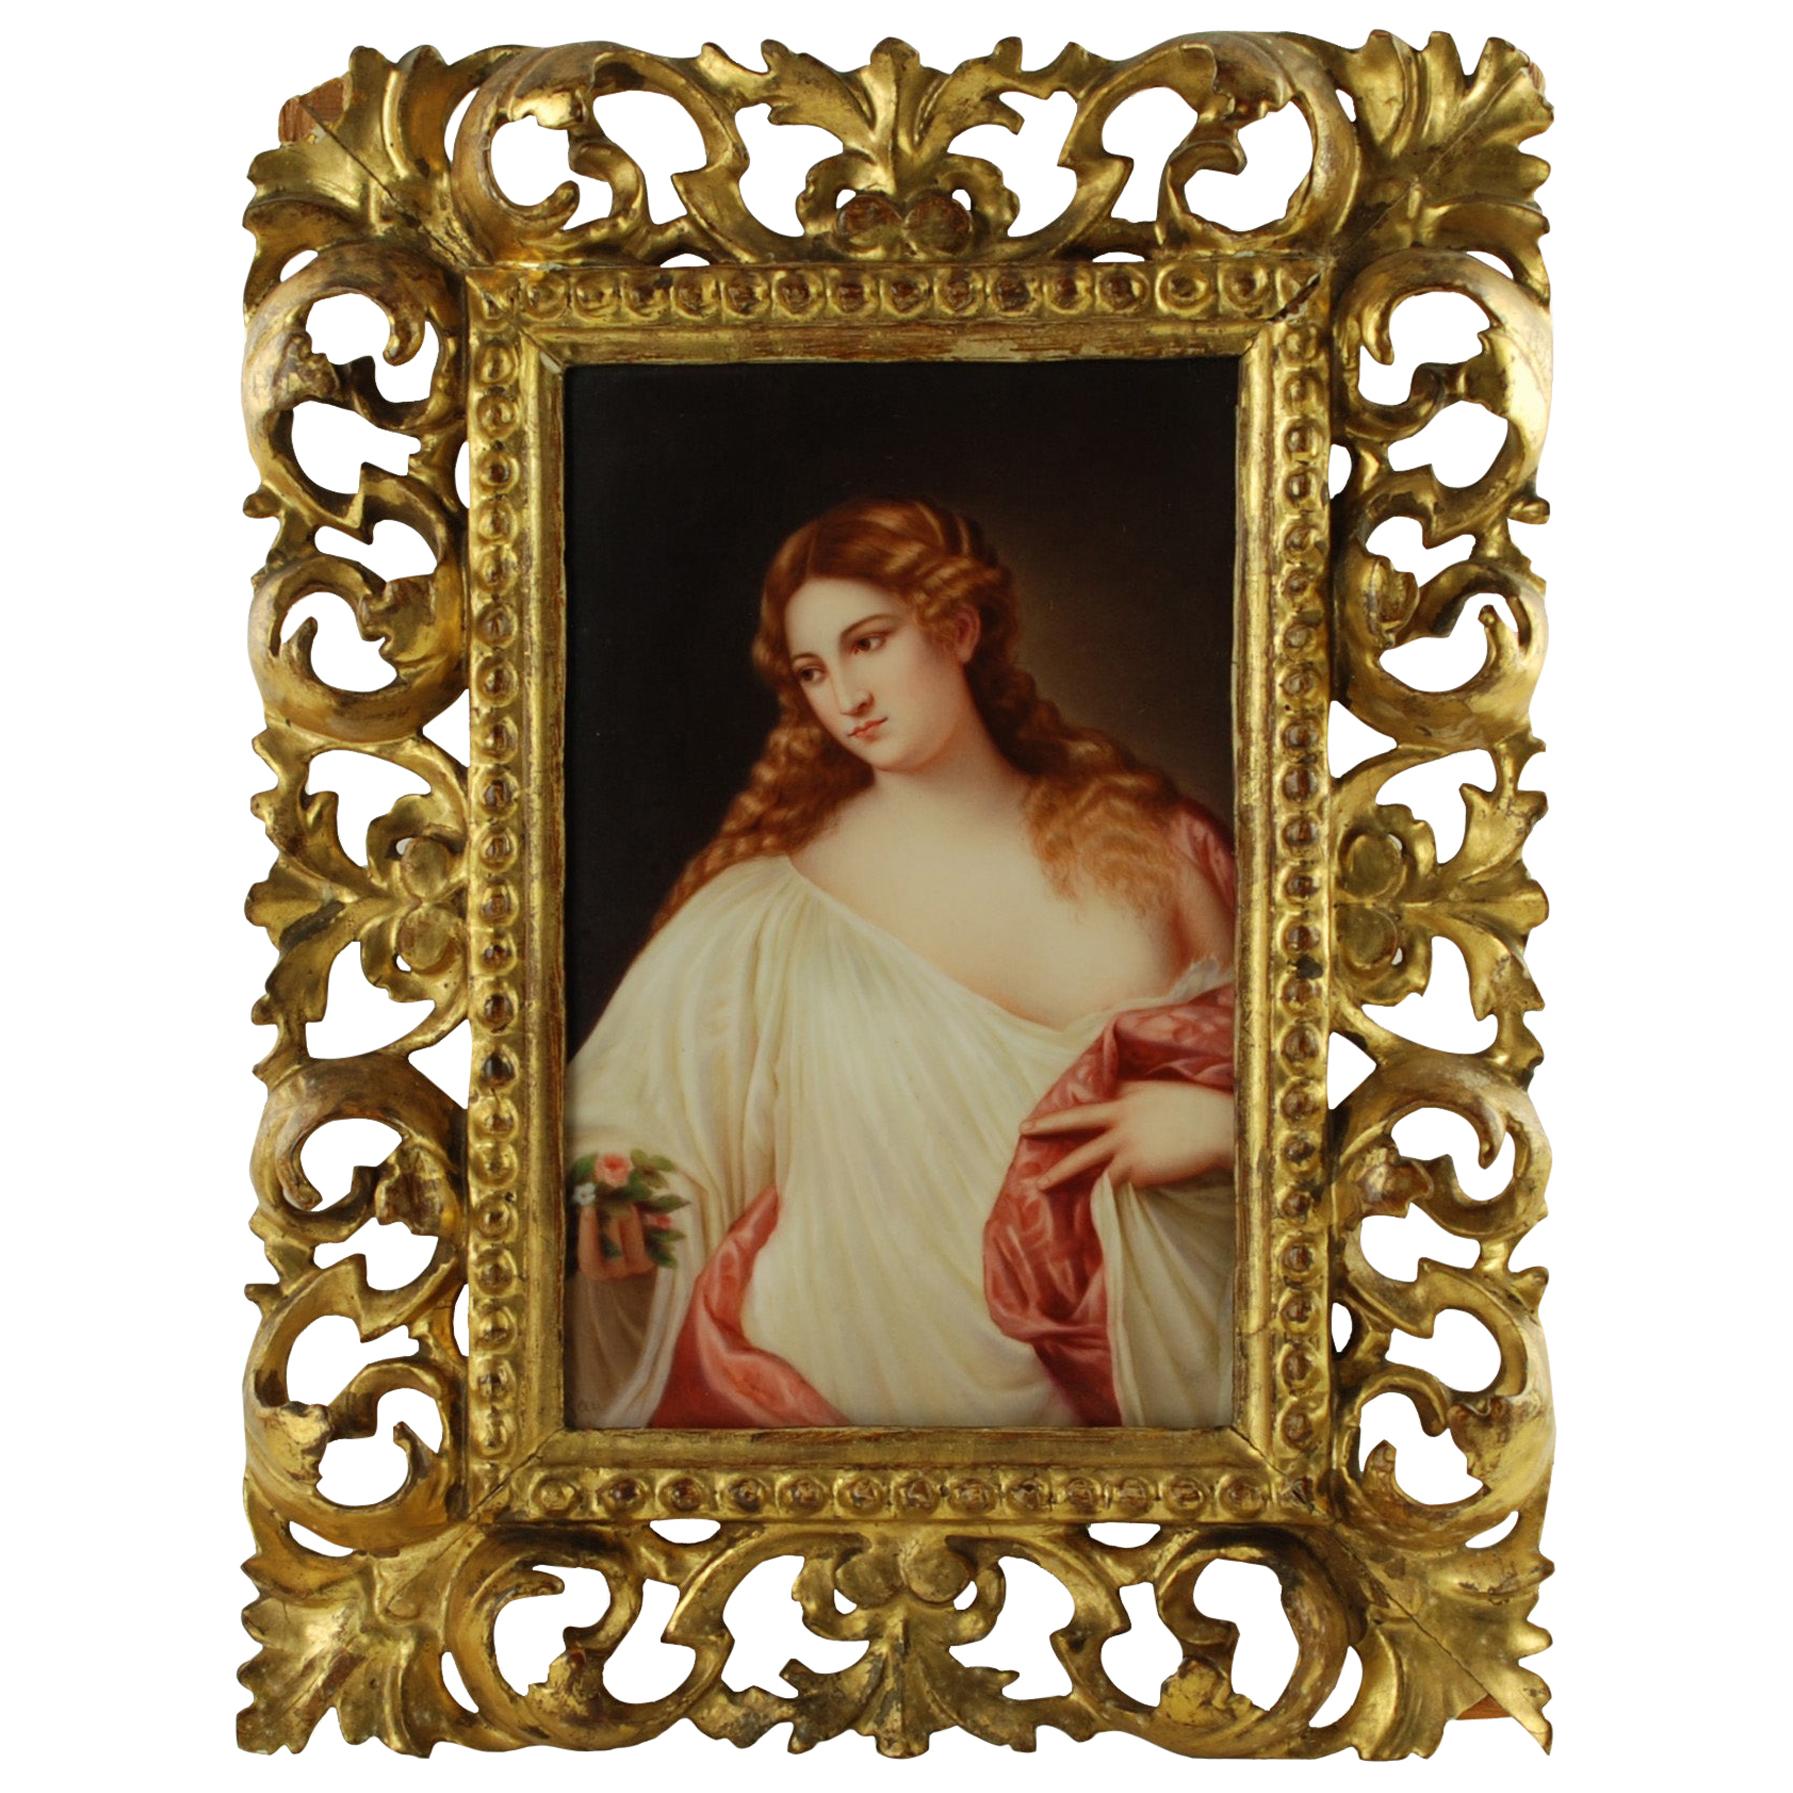 19th Century Hand-Painted Porcelain Plaque, "Flora" after Titian Signed by Rau